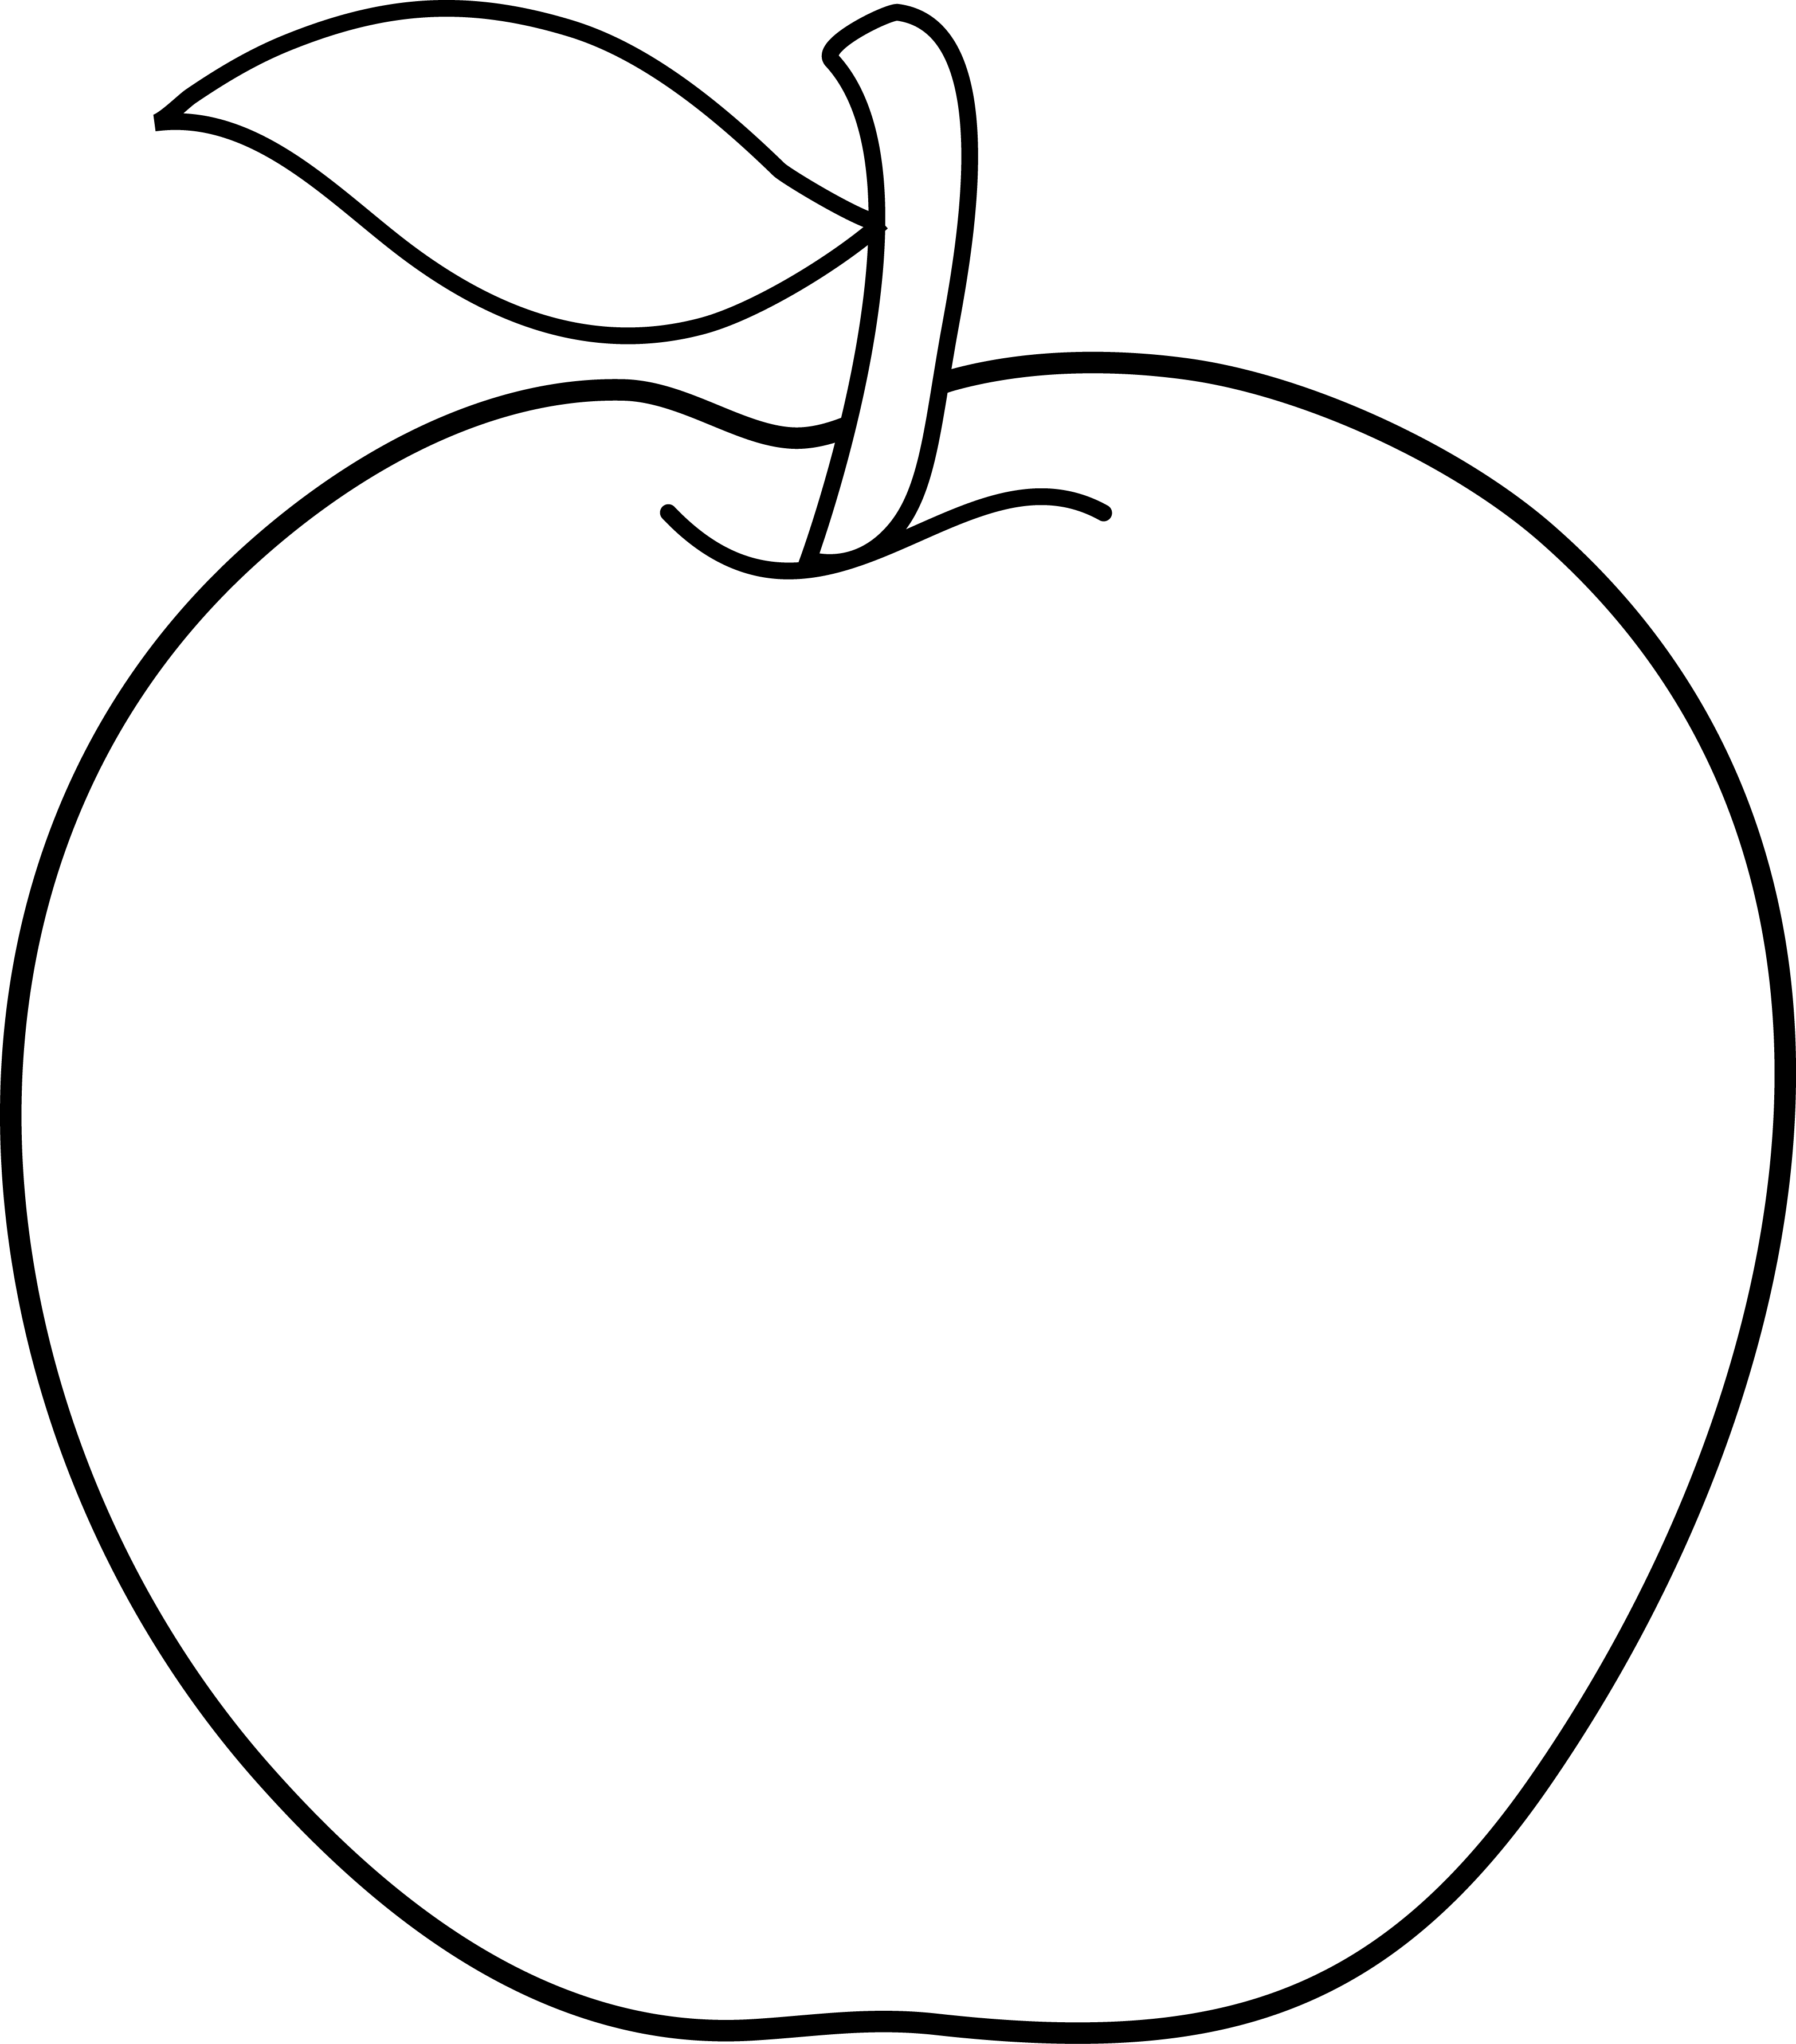 Free Clipart Apple - Cliparts.co